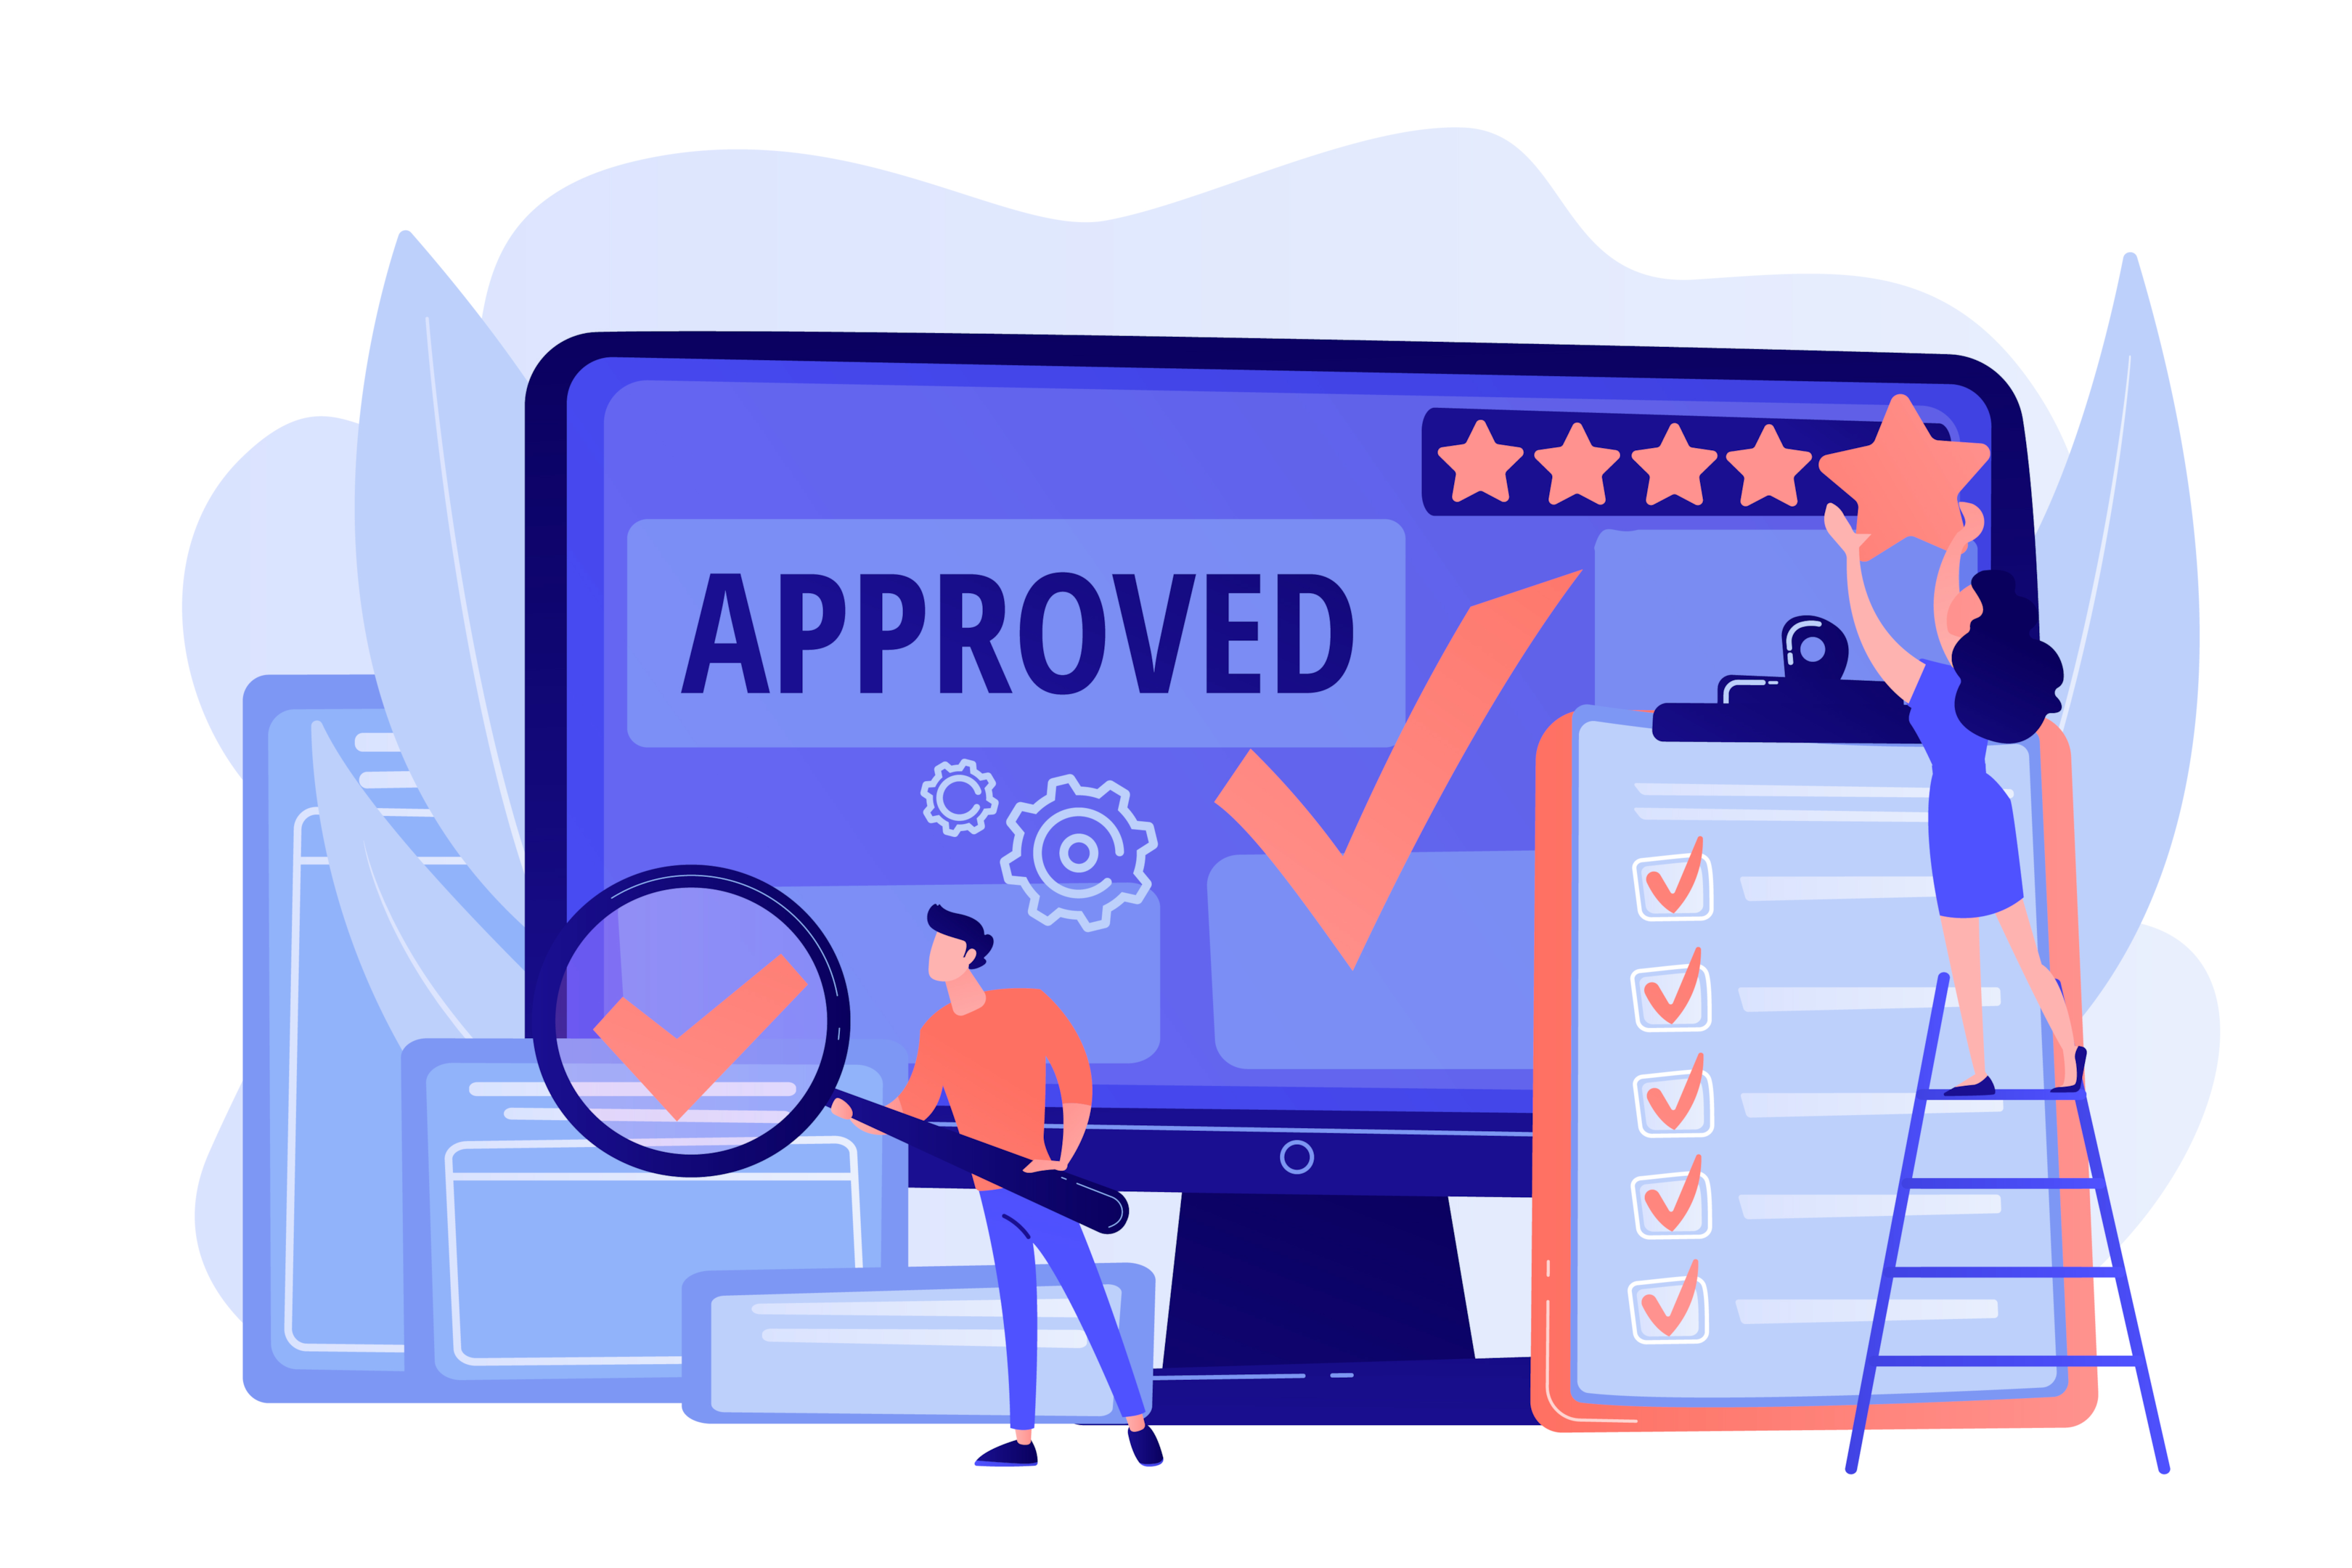 The illustration portrays the objective of a QA team as an "approval mark.